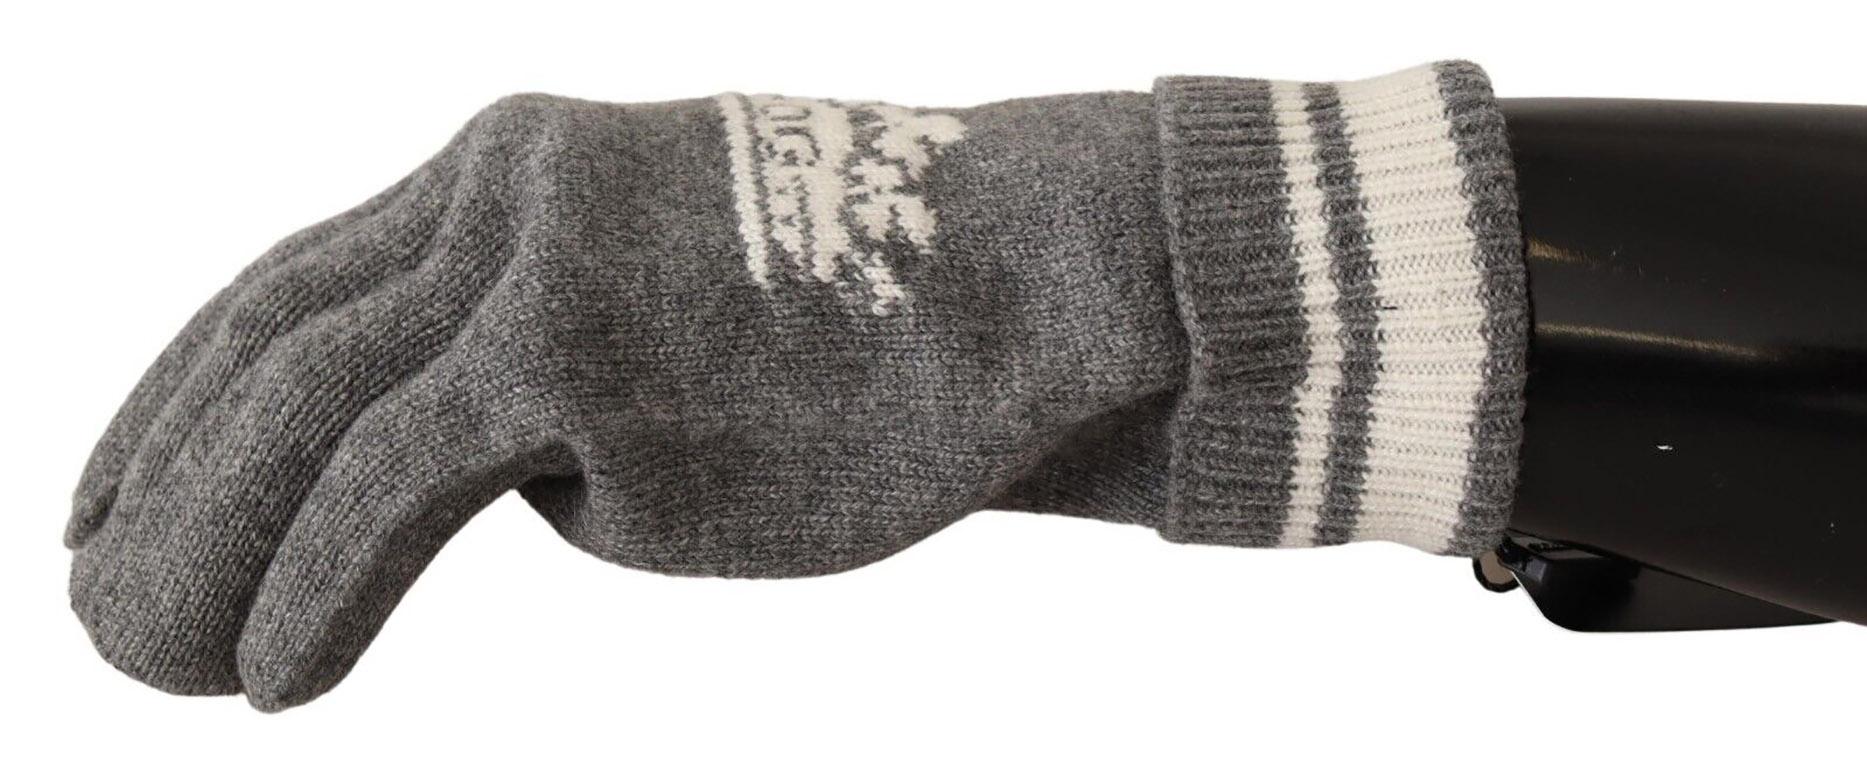 Dolce & Gabbana

Gorgeous brand new with tags, 100% Authentic Dolce & Gabbana gloves. Lightweight cashmere yarn was used to create gloves. The material based on the soft down of mountain goats is not prickly and perfectly retains heat. The Gray